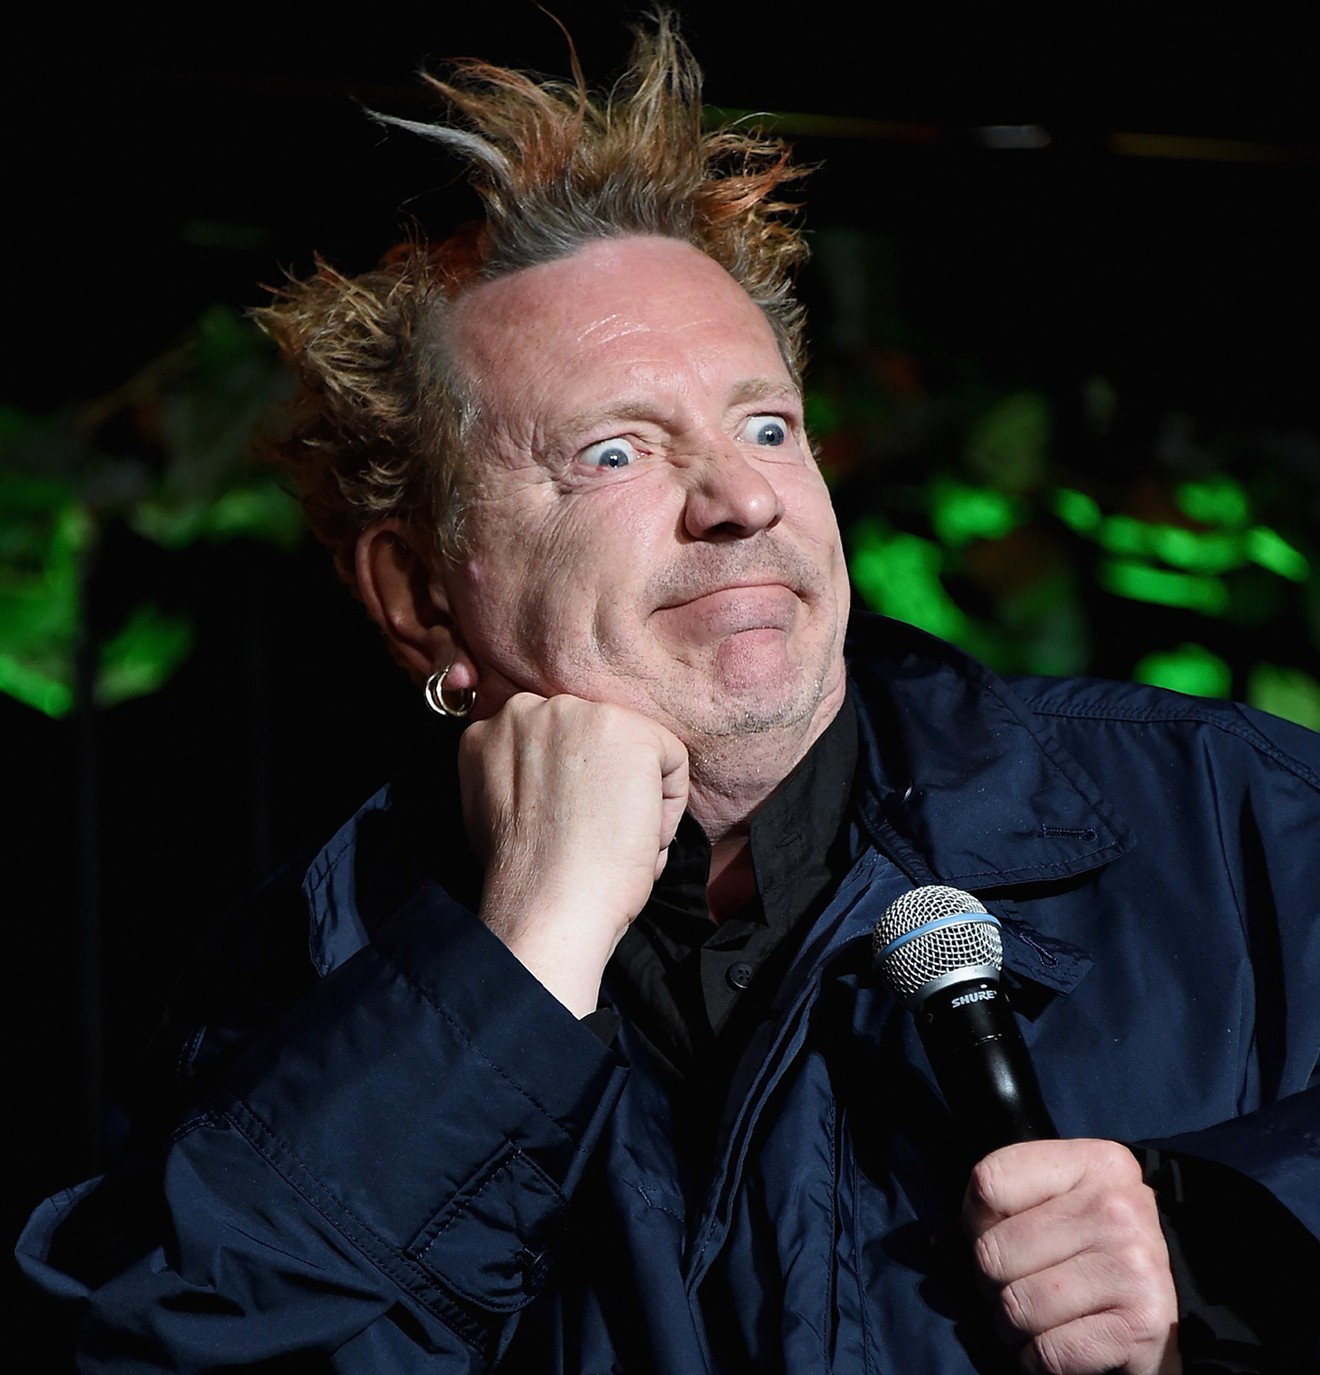 These days, Johnny Rotten is signing "God Save Donald Trump."